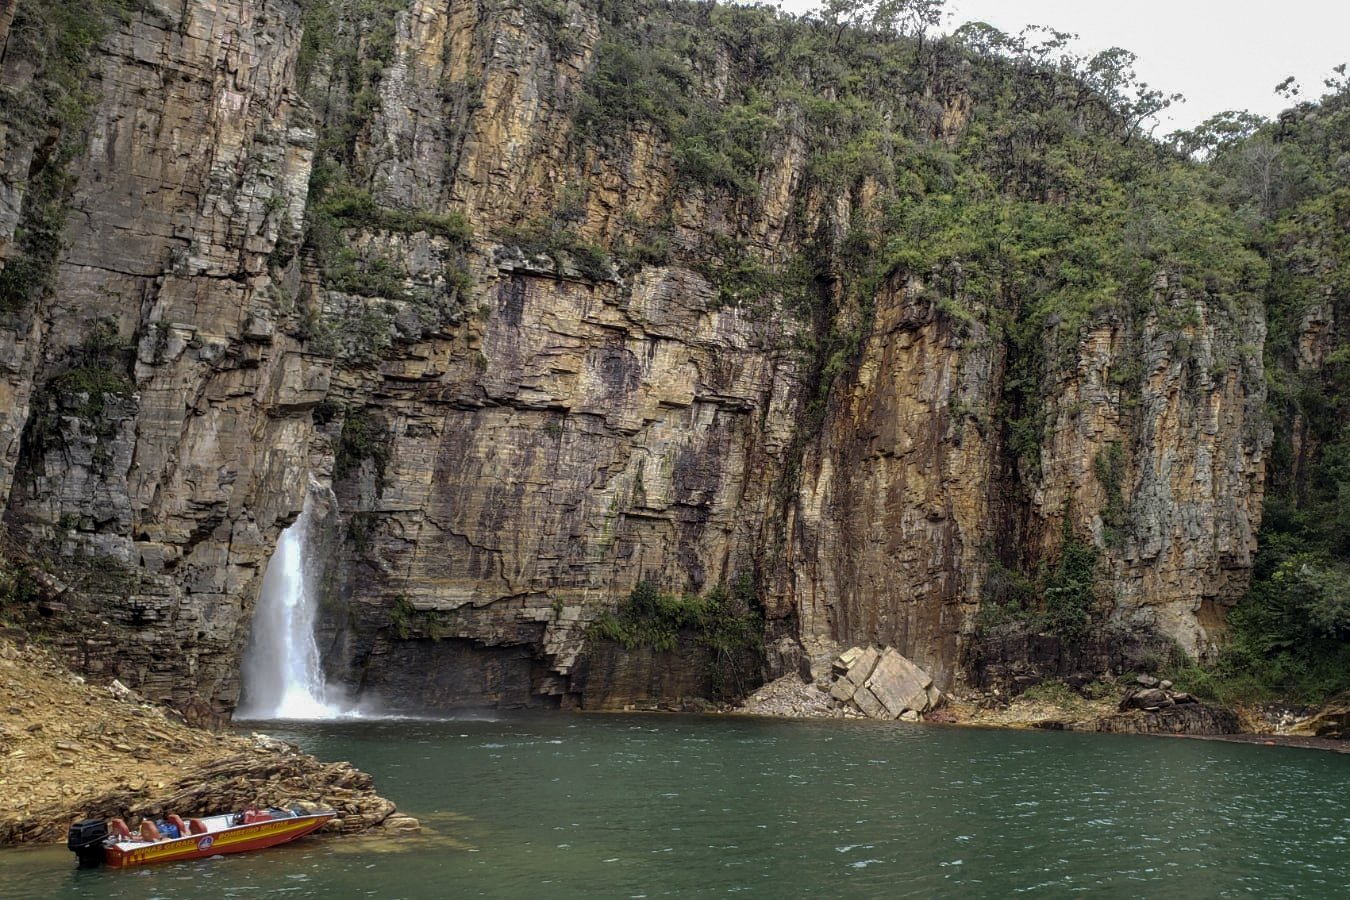 This handout picture released by Minas Gerais Fire Department shows the area where a large rock fragment broke off a ravine and plunged onto several tourist boats, leaving at least 10 people dead, at the canyons of Furnas Lake, city of Capitolio, Minas Gerais state, Brazil, Jan. 8, 2022. (AFP Photo/Minas Gerais Fire Department)